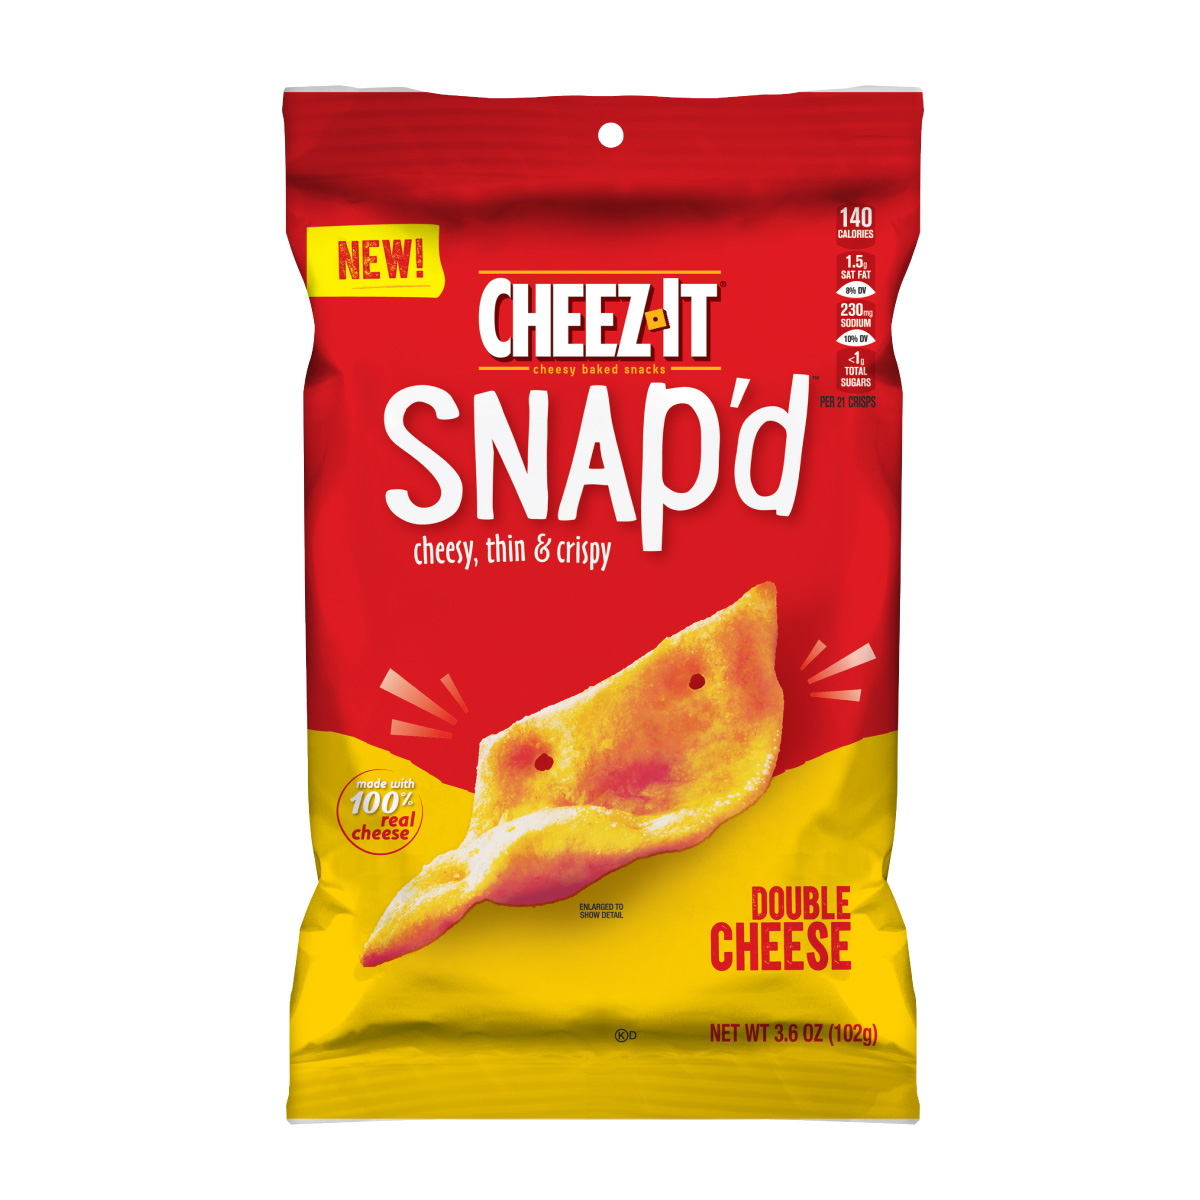 Cheeze-it Snapd Double Cheese snacks malaysia